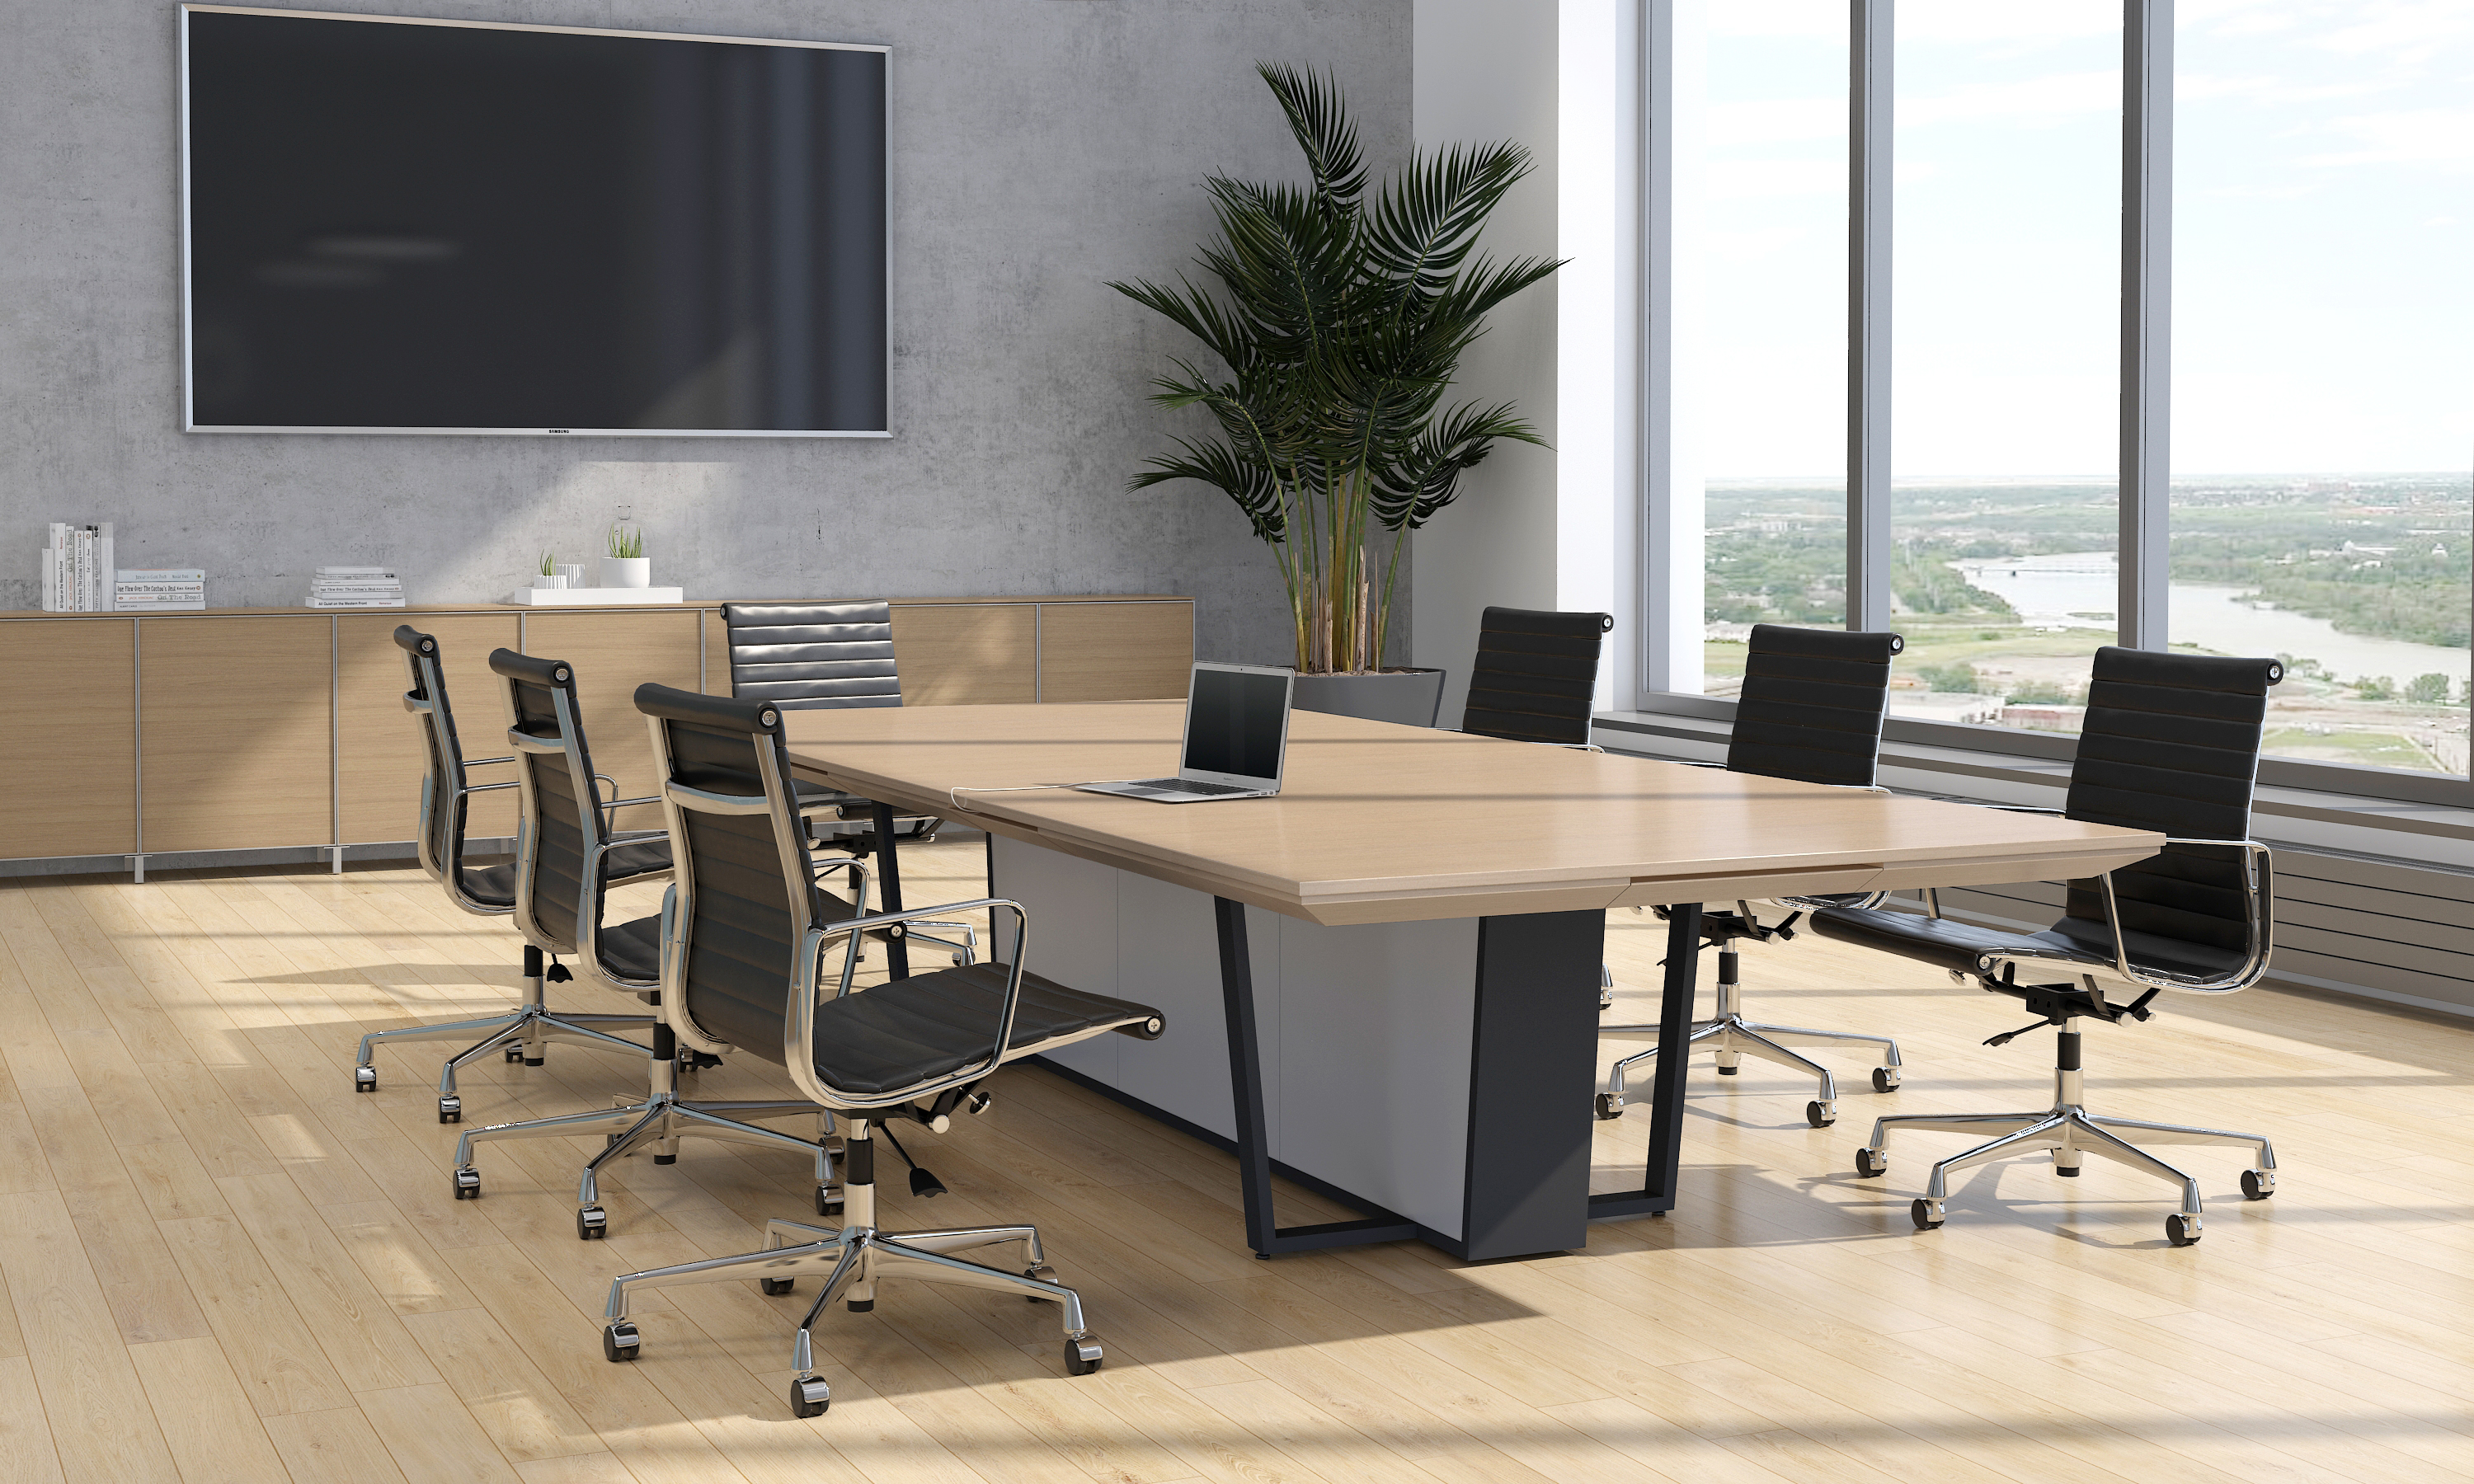 conference table, meeting table, conference room, meeting room, lauren rottet, premium conference table,